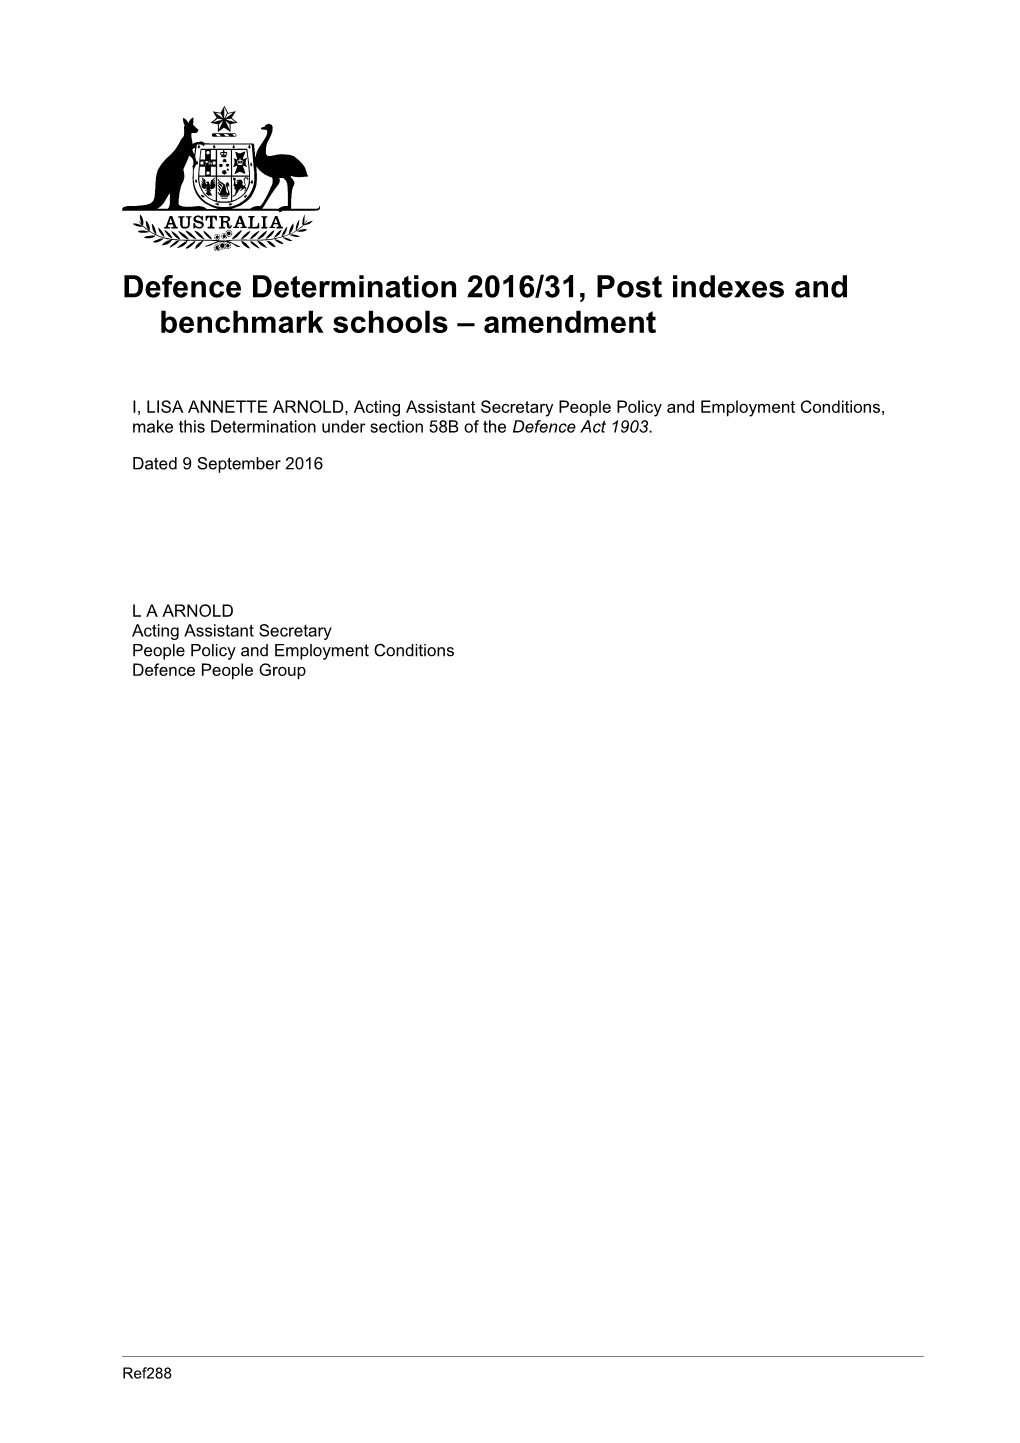 Defence Determination 2016/31, Post Indexes and Benchmark Schools Amendment